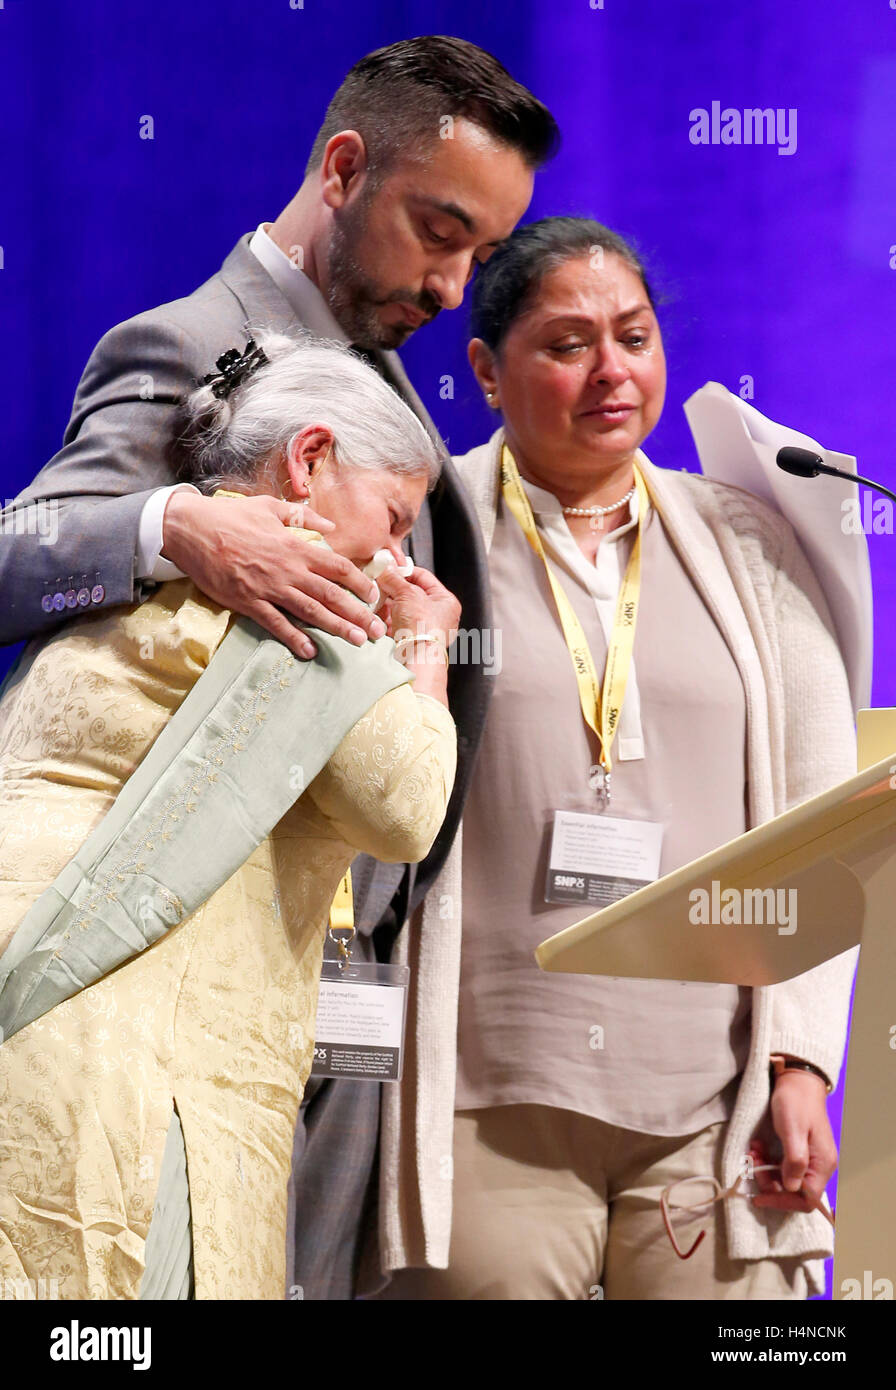 Lawyer Aawer Anwar, who represented the family of murdered Sikh waiter Surjit Singh Chhokar, addresses delegates at the SNP conference in Glasgow, with Surjit's mother Gurder Kaur Chhokar (left) and sister Manjit Sangha. PRESS ASSOCIATION Photo. Picture date: Saturday October 15, 2016. See PA story POLITICS SNP. Photo credit should read: Jane Barlow/PA Wire Stock Photo